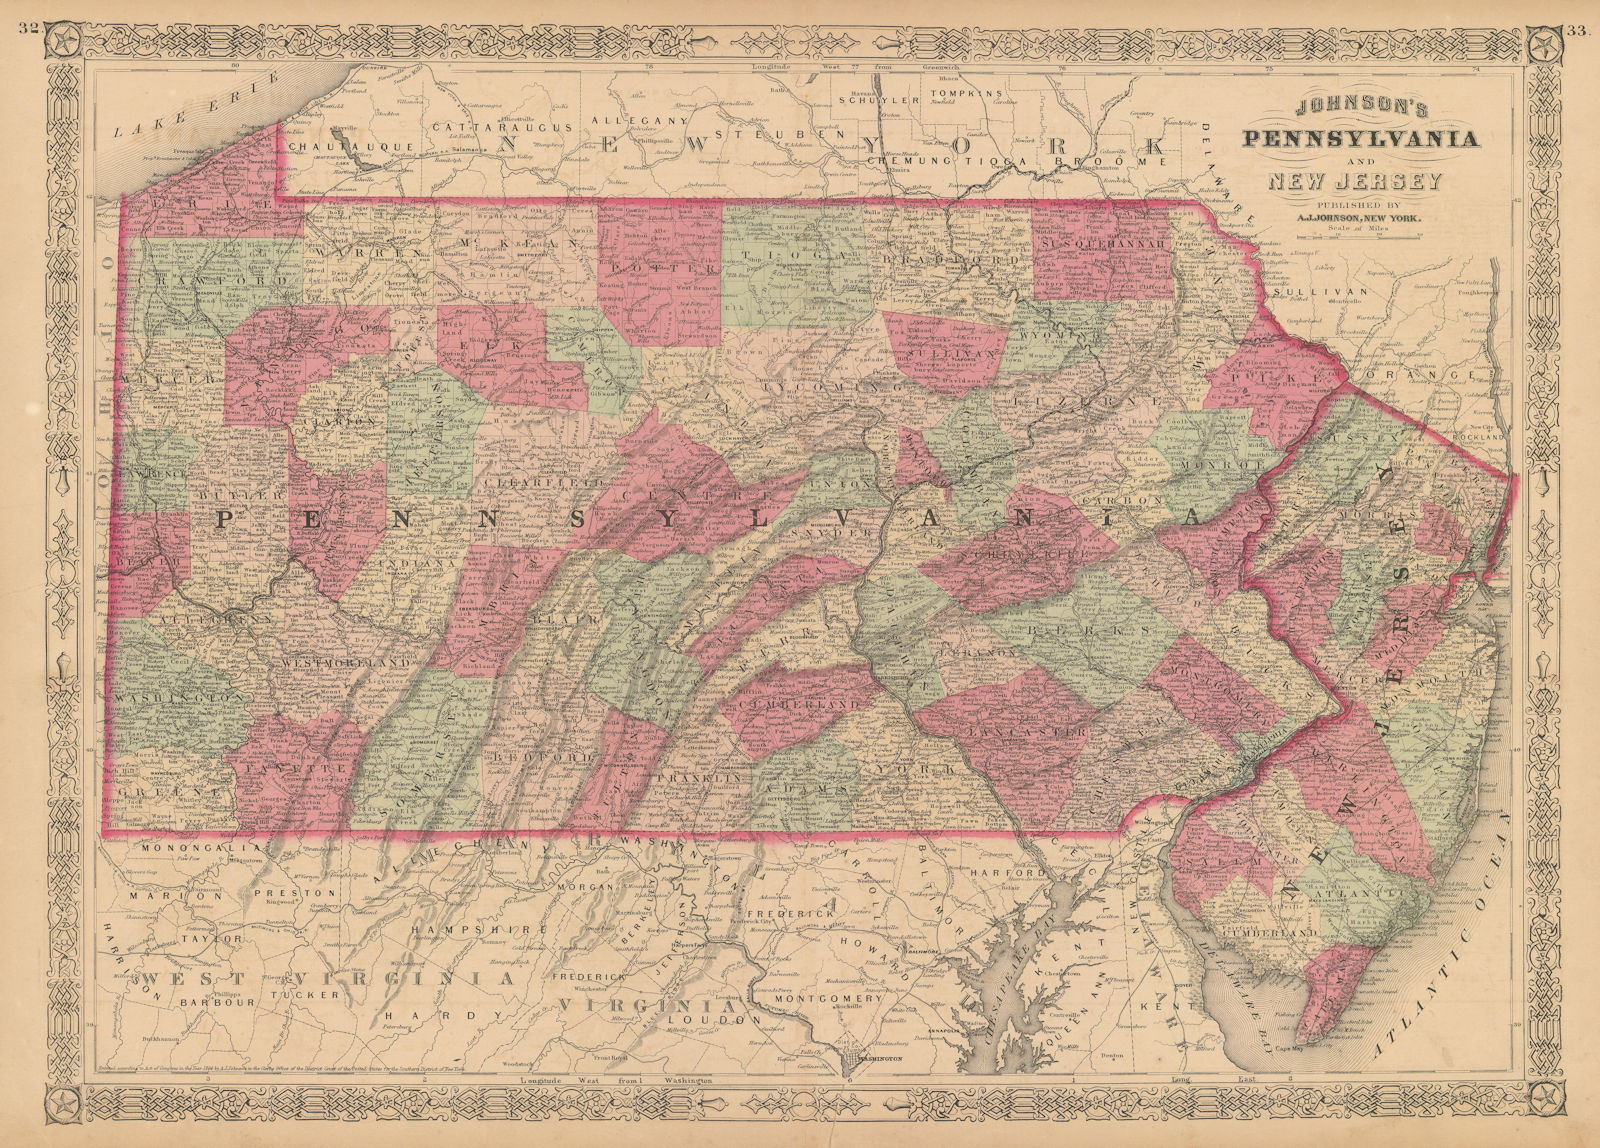 Johnson's Pennsylvania and New Jersey. US state map showing counties 1867